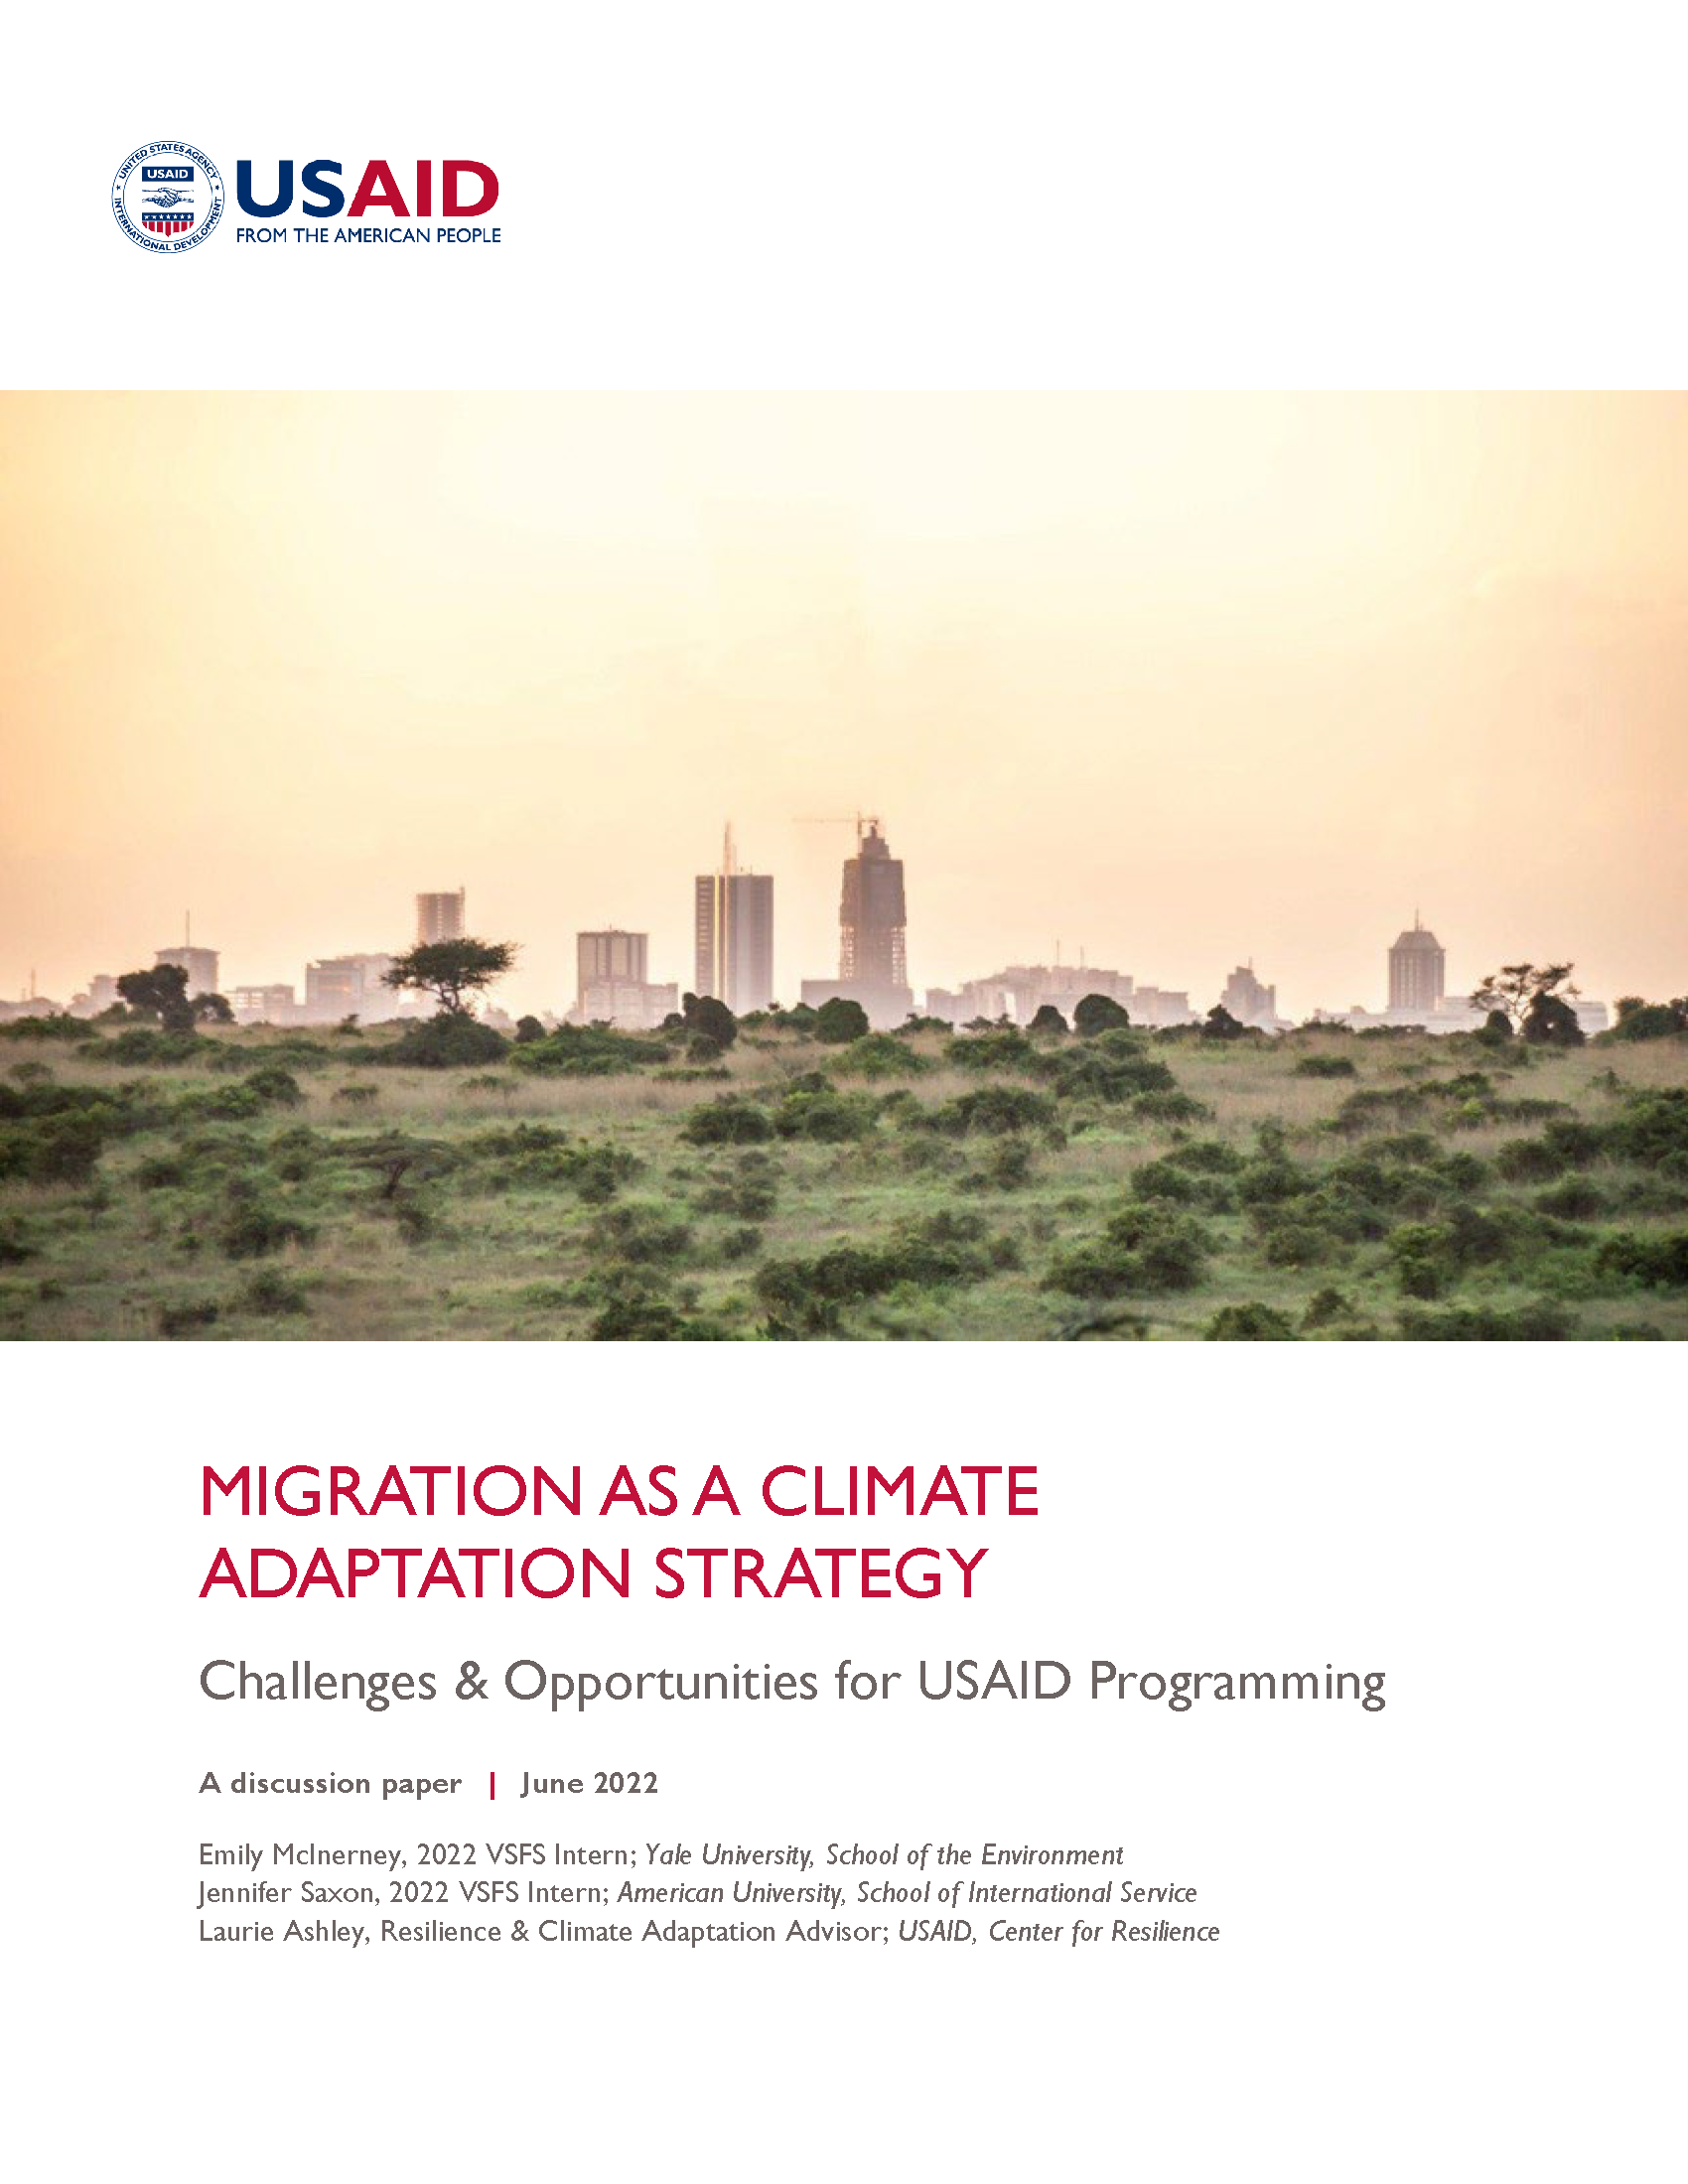 Cover for Migration as a Climate Adaptation Strategy: Challenges & Opportunities for USAID Programs